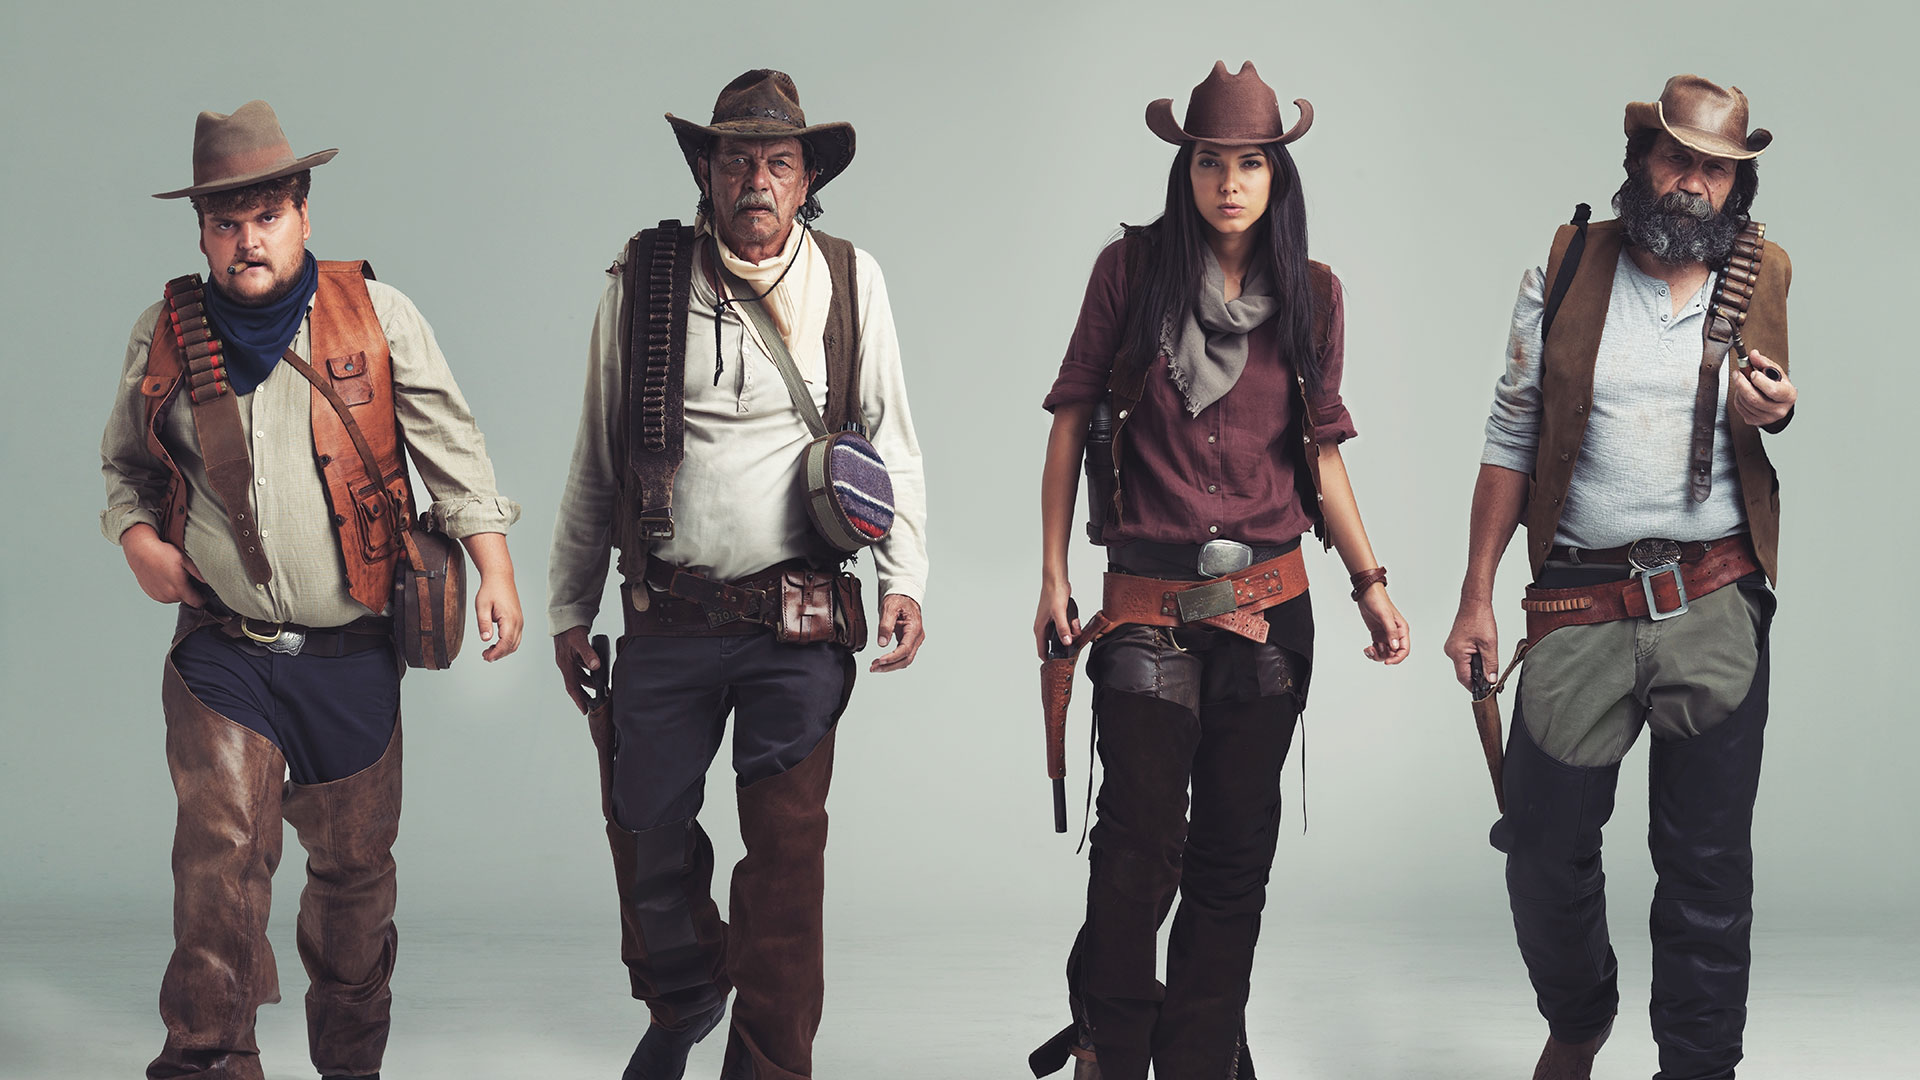 3 men and one woman dressed as cowboys